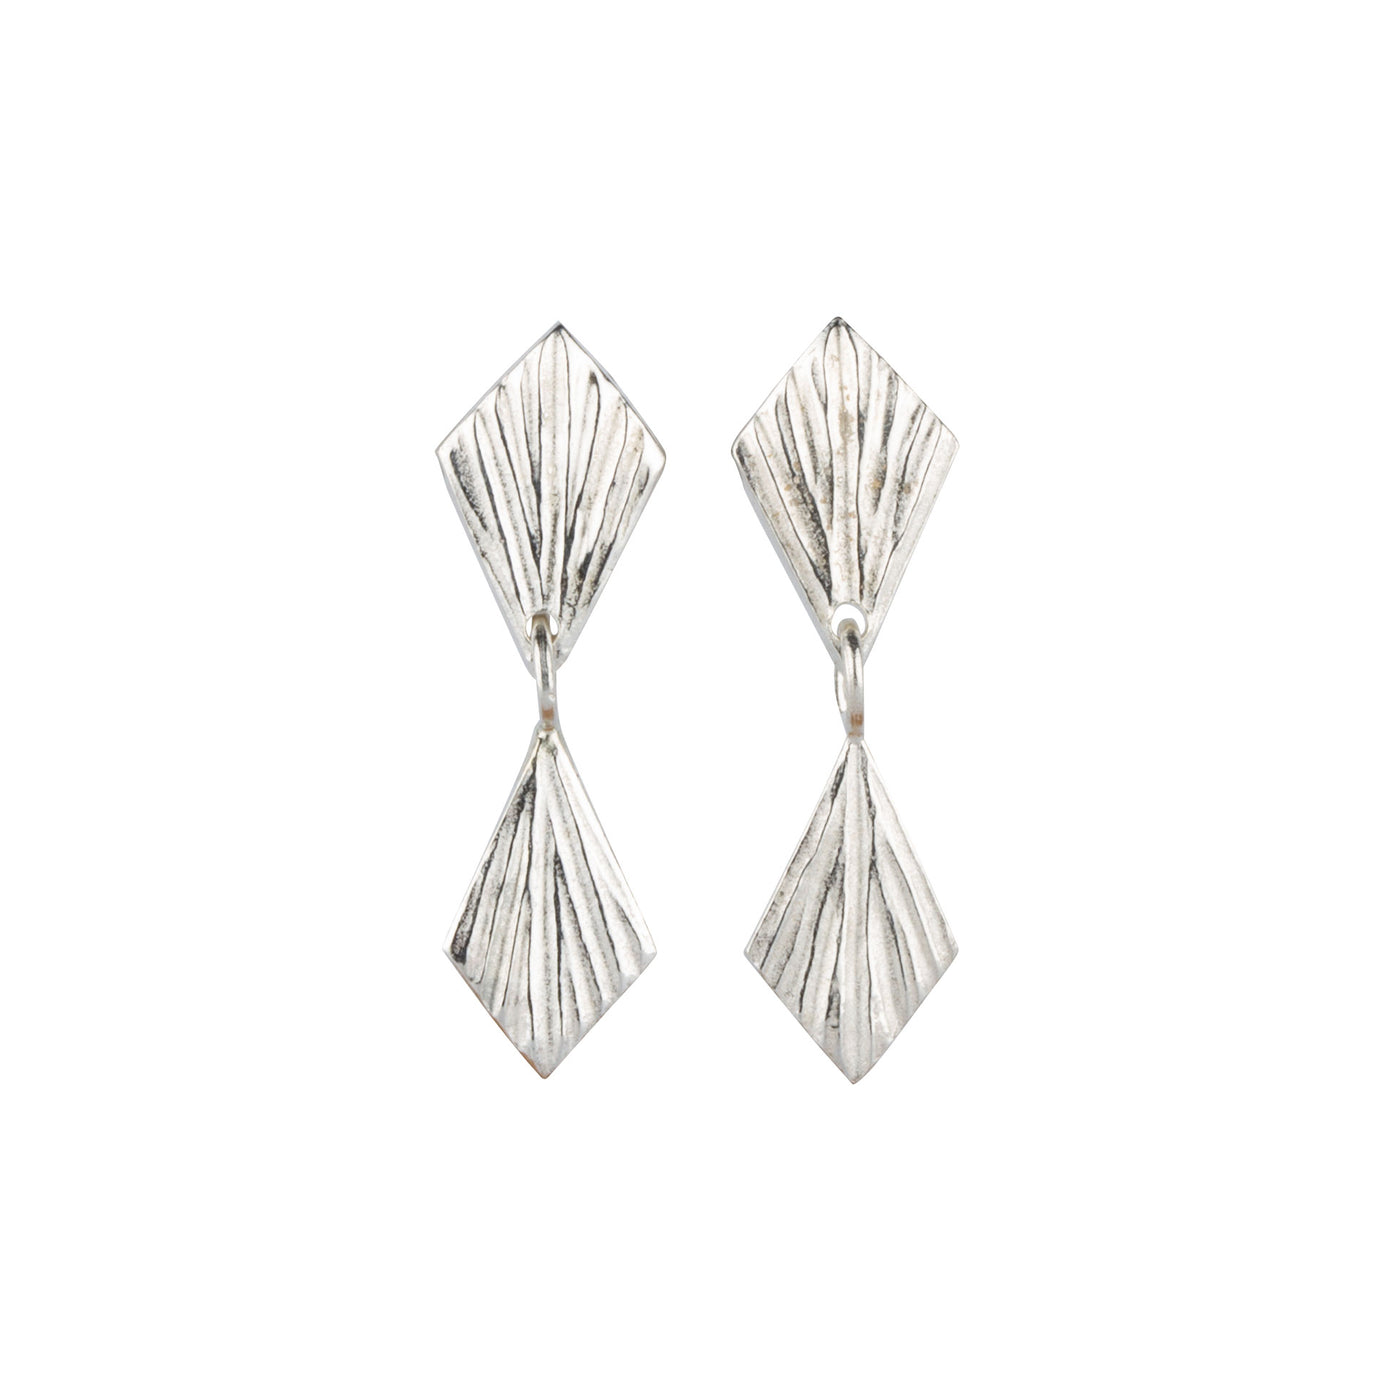 Double Flame Silver Dangle Earrings on a white background